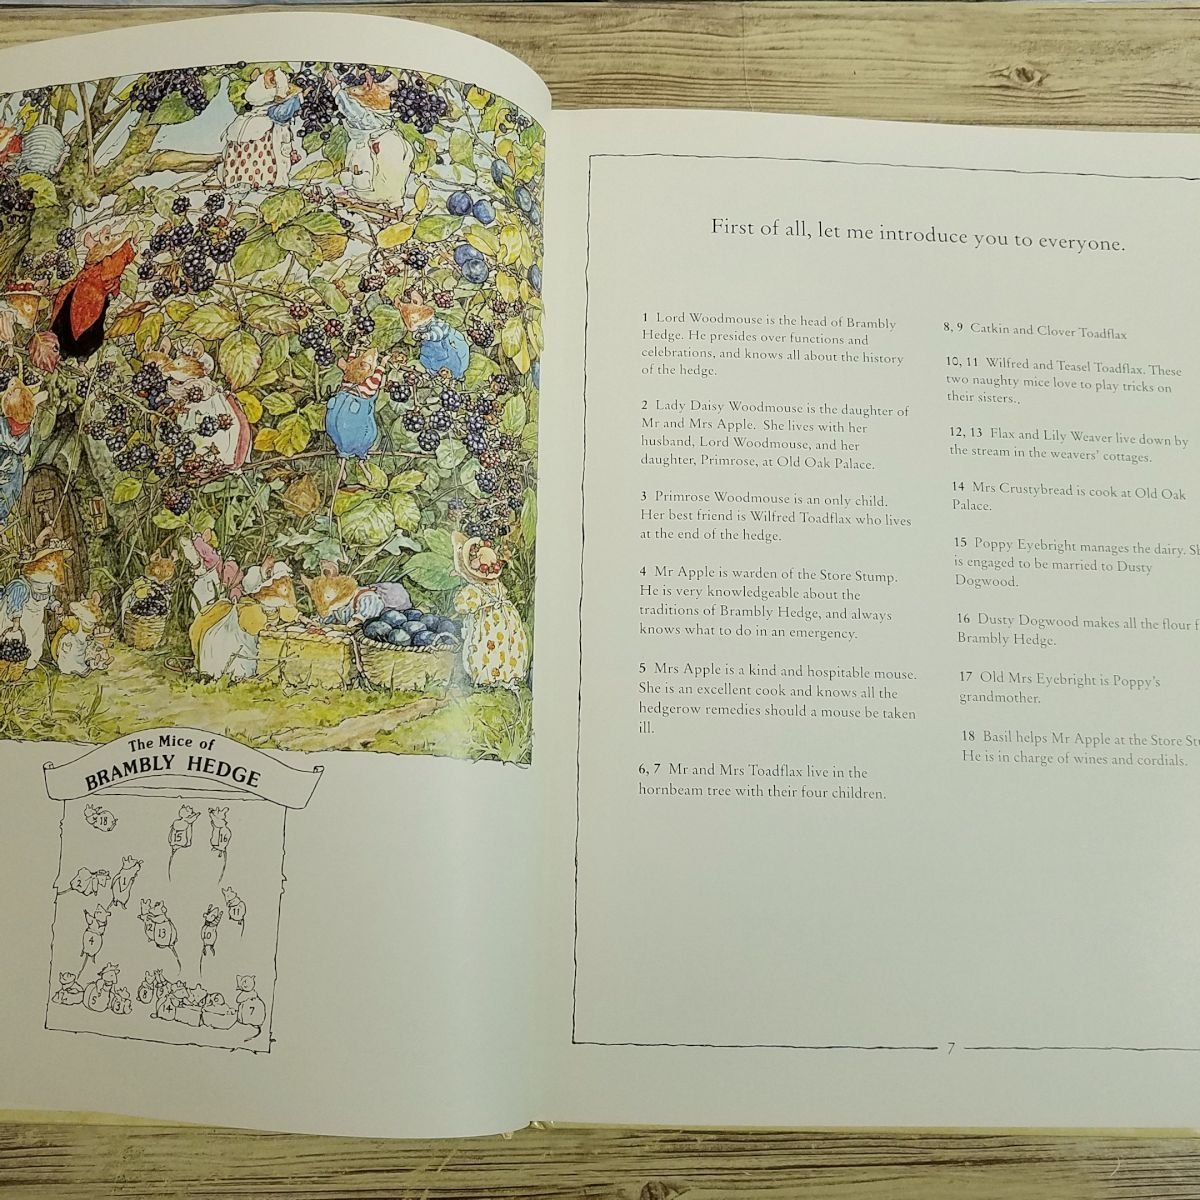  foreign language picture book [. ... .. thing ...BRAMBLY HEDGE TRESURY] secret. ....+ Will Fred. .. nobori + explanation foreign book Jill * Burke Lem 